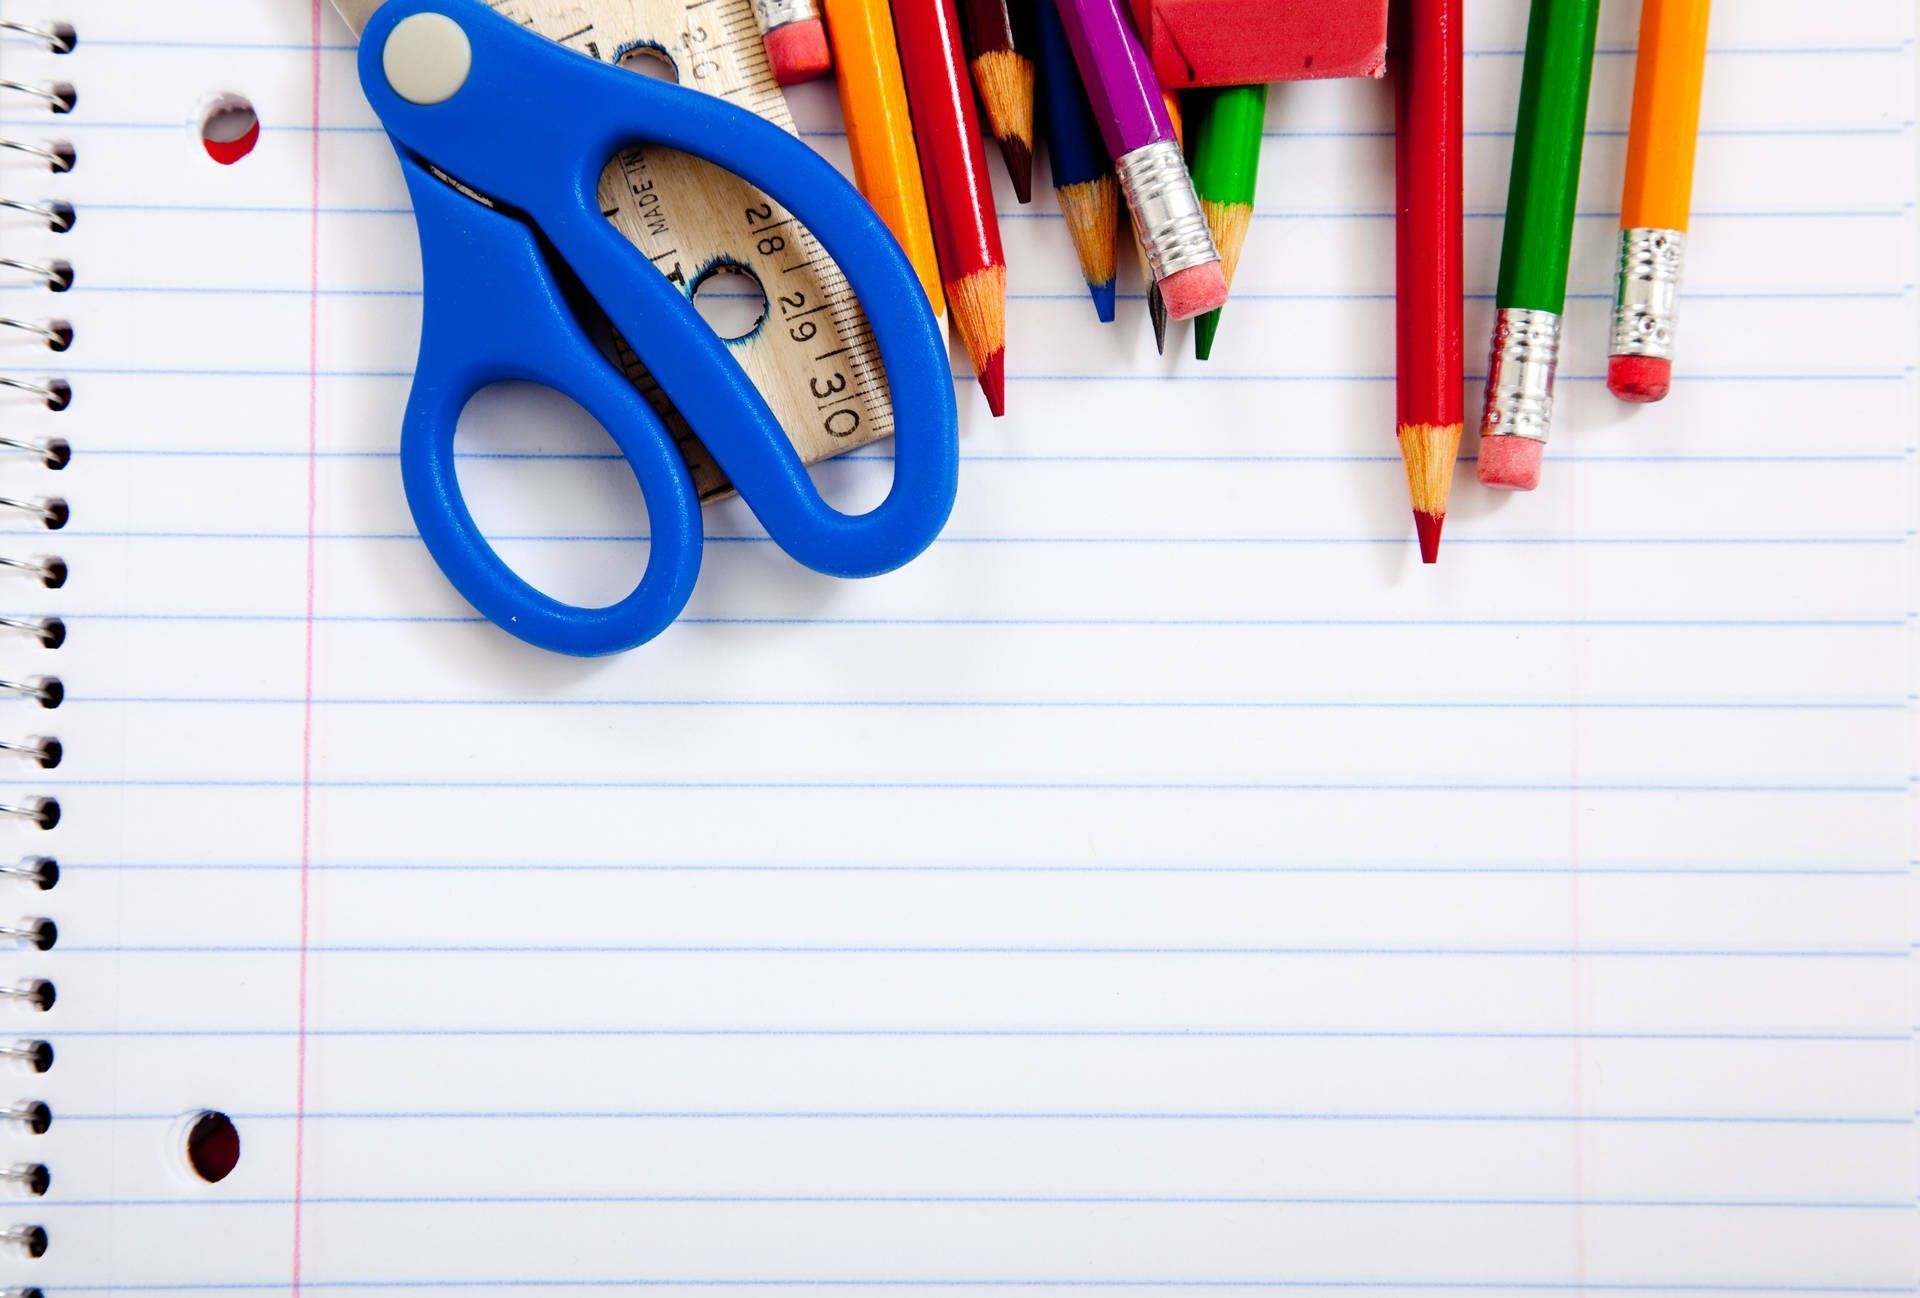 A notebook with pencils, scissors and other school supplies - School